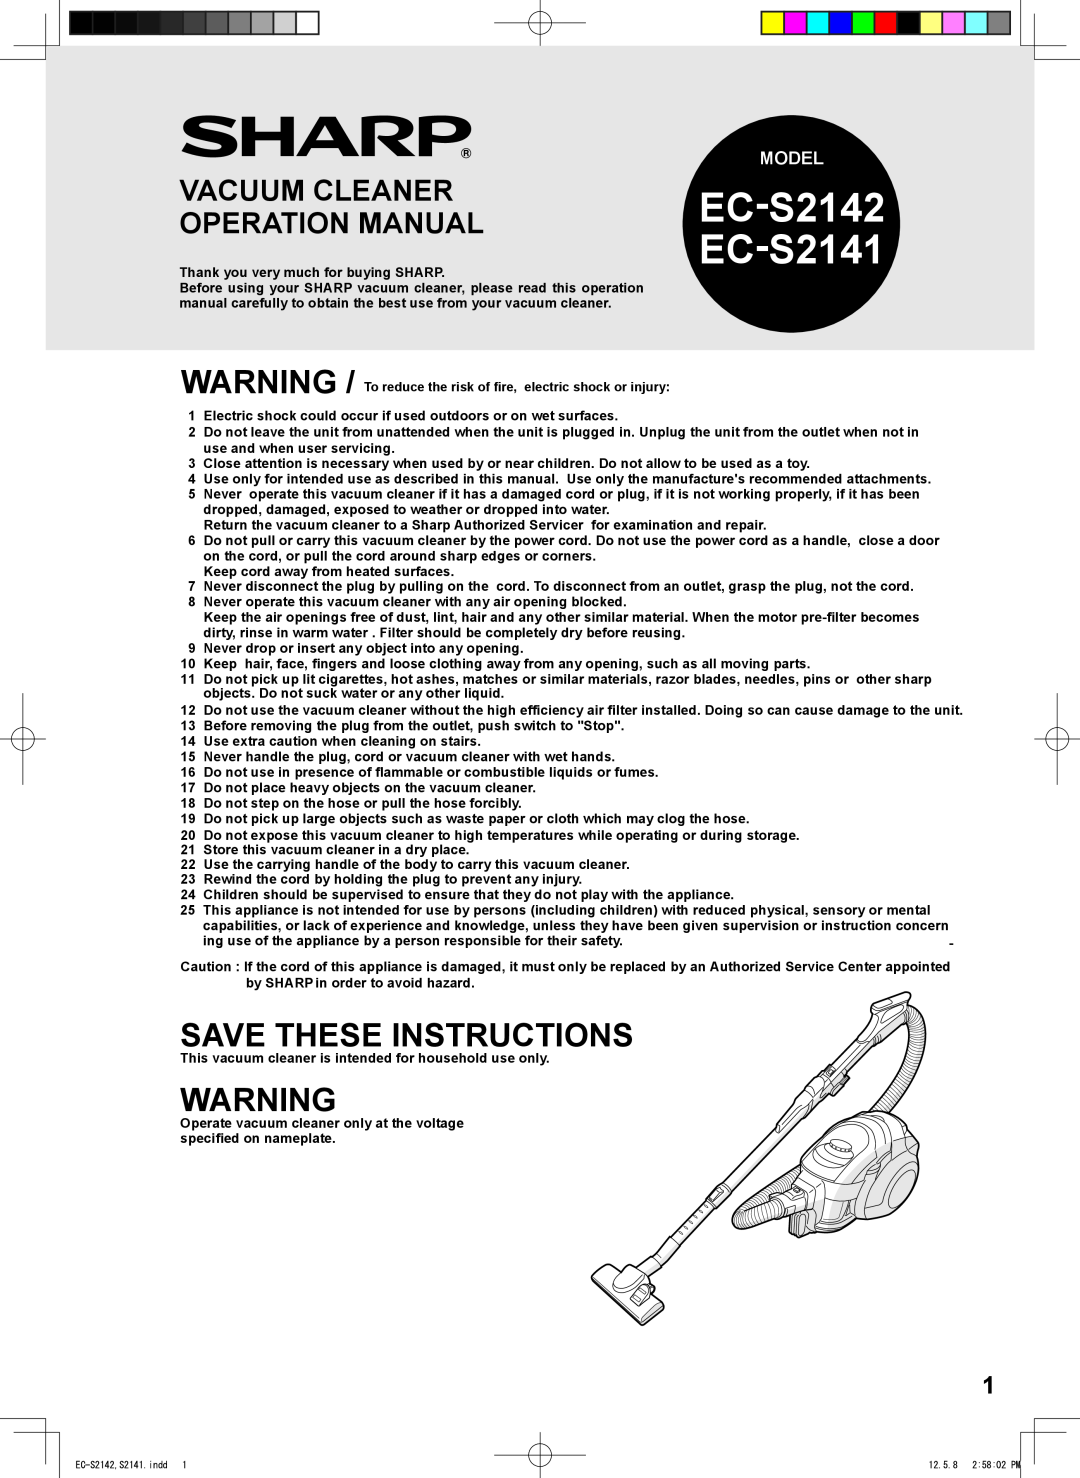 Sharp operation manual Model, EC-S2142 EC-S2141, Save These Instructions 